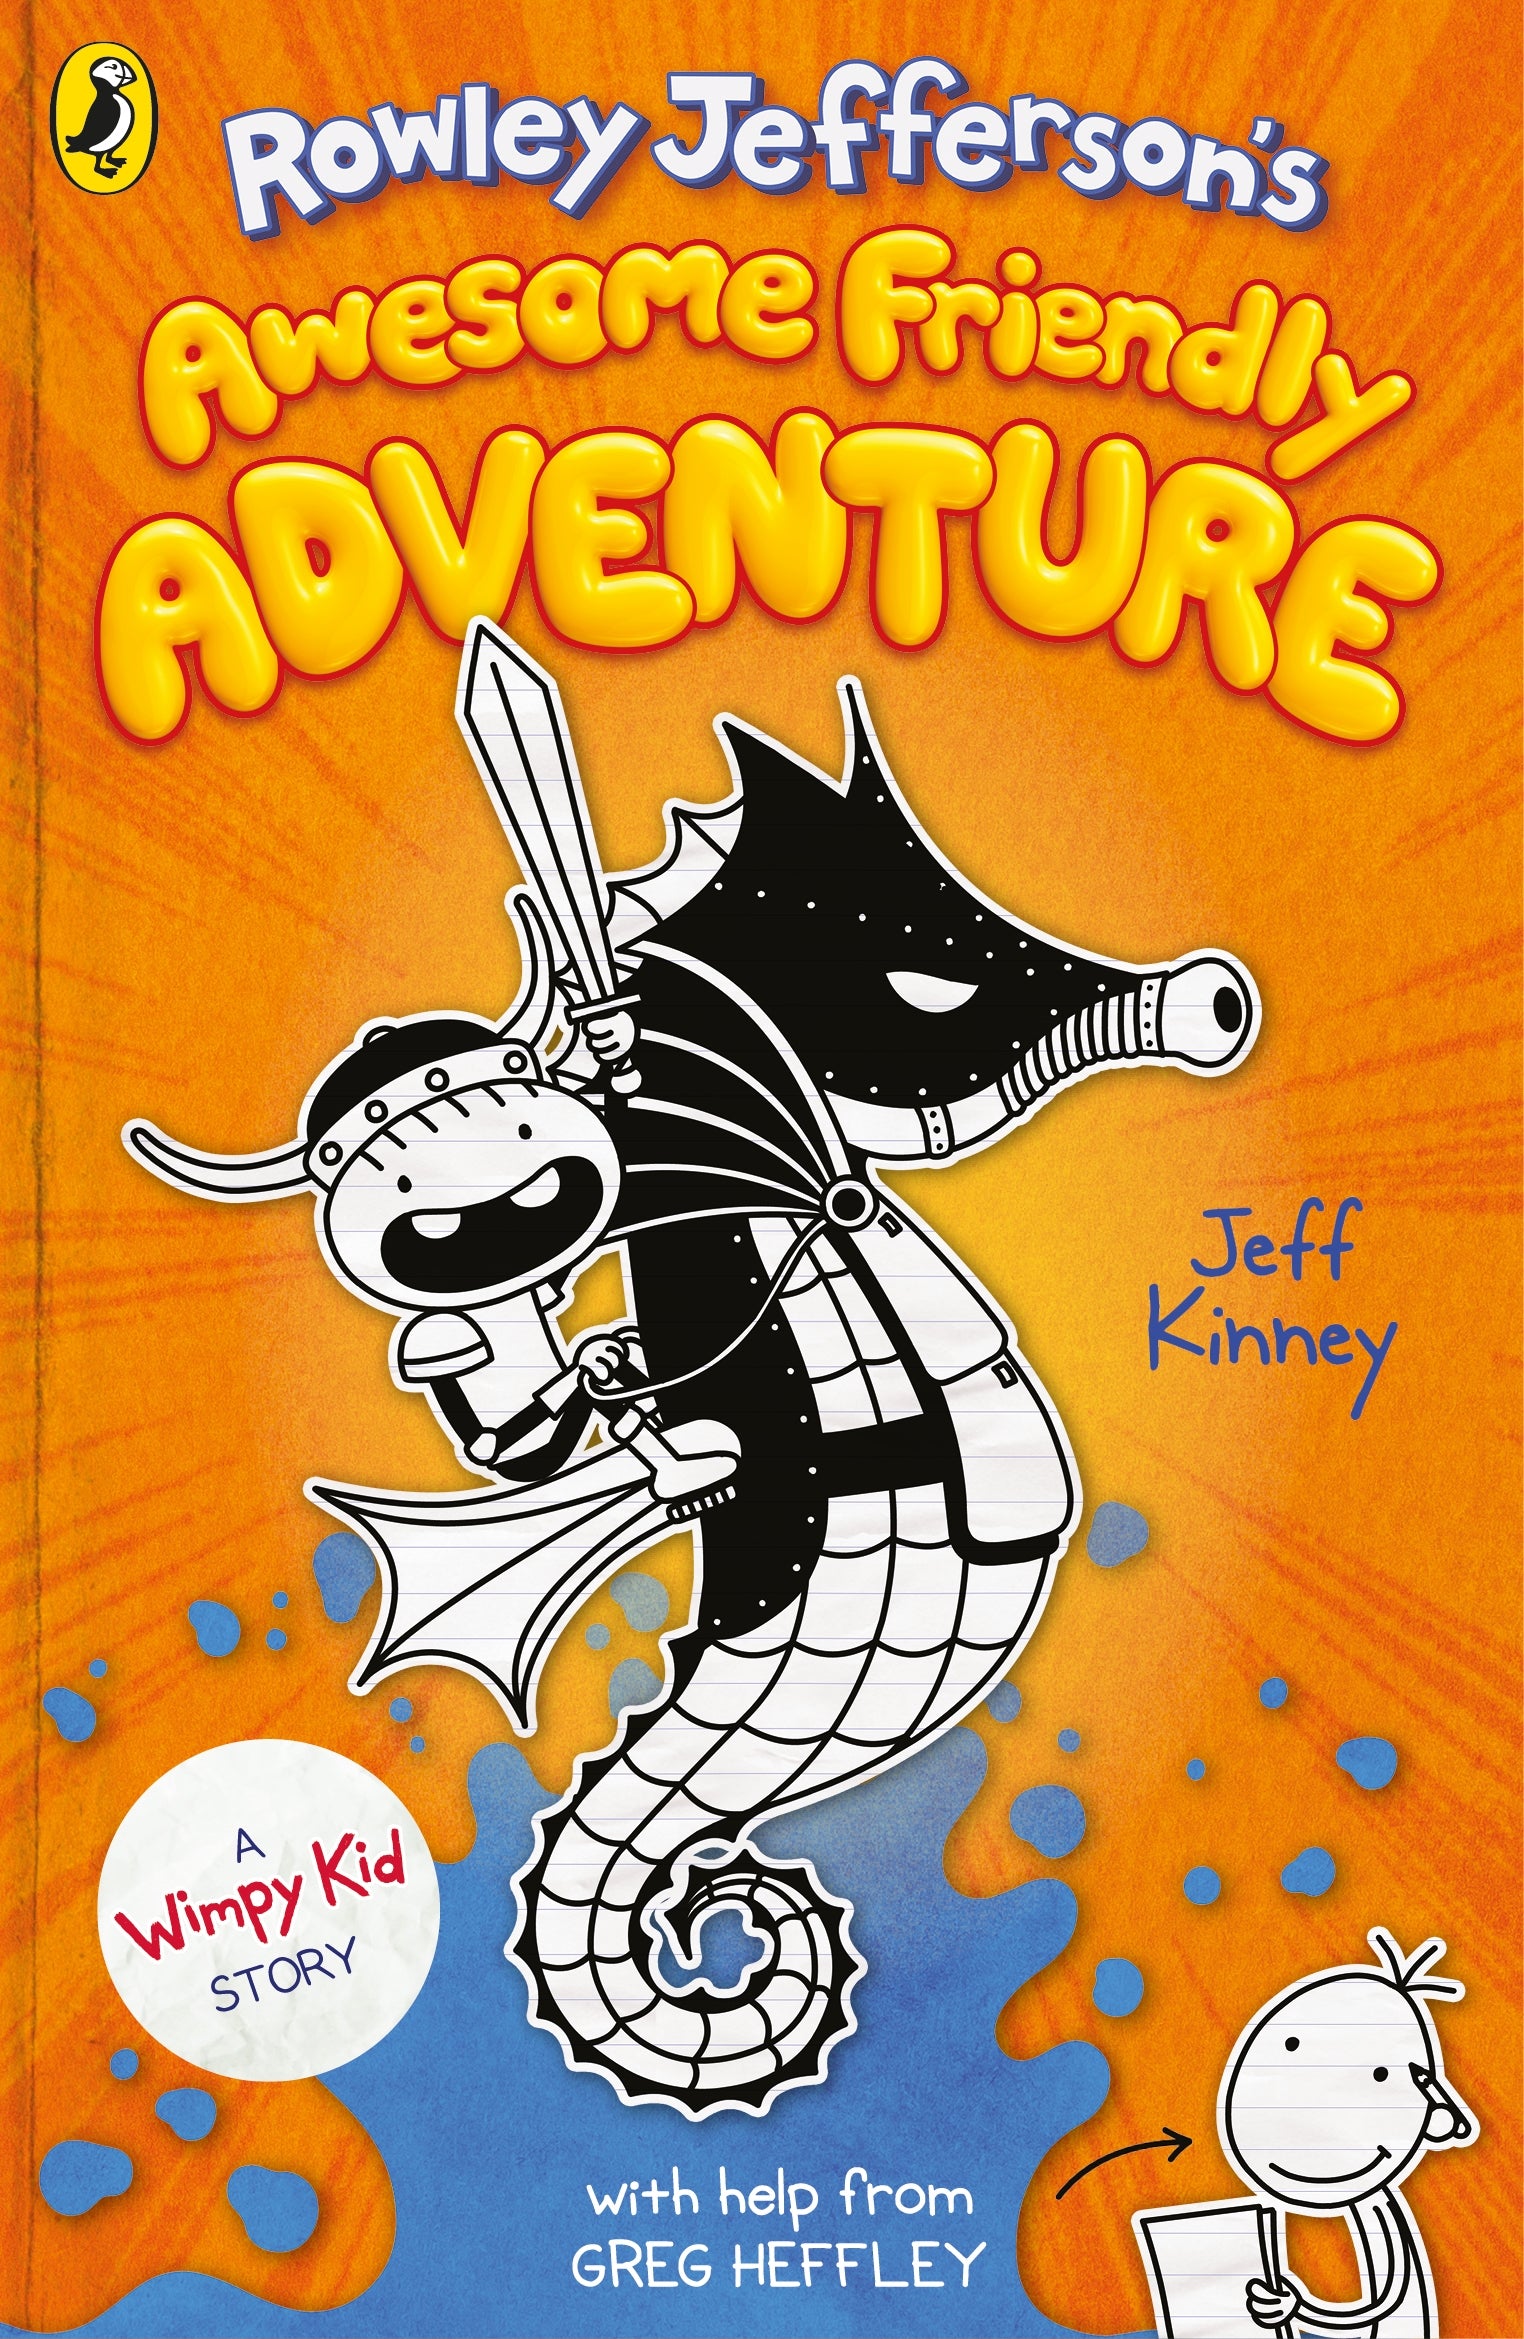 Awesome friendly adventure (Wimpy Kid Story)